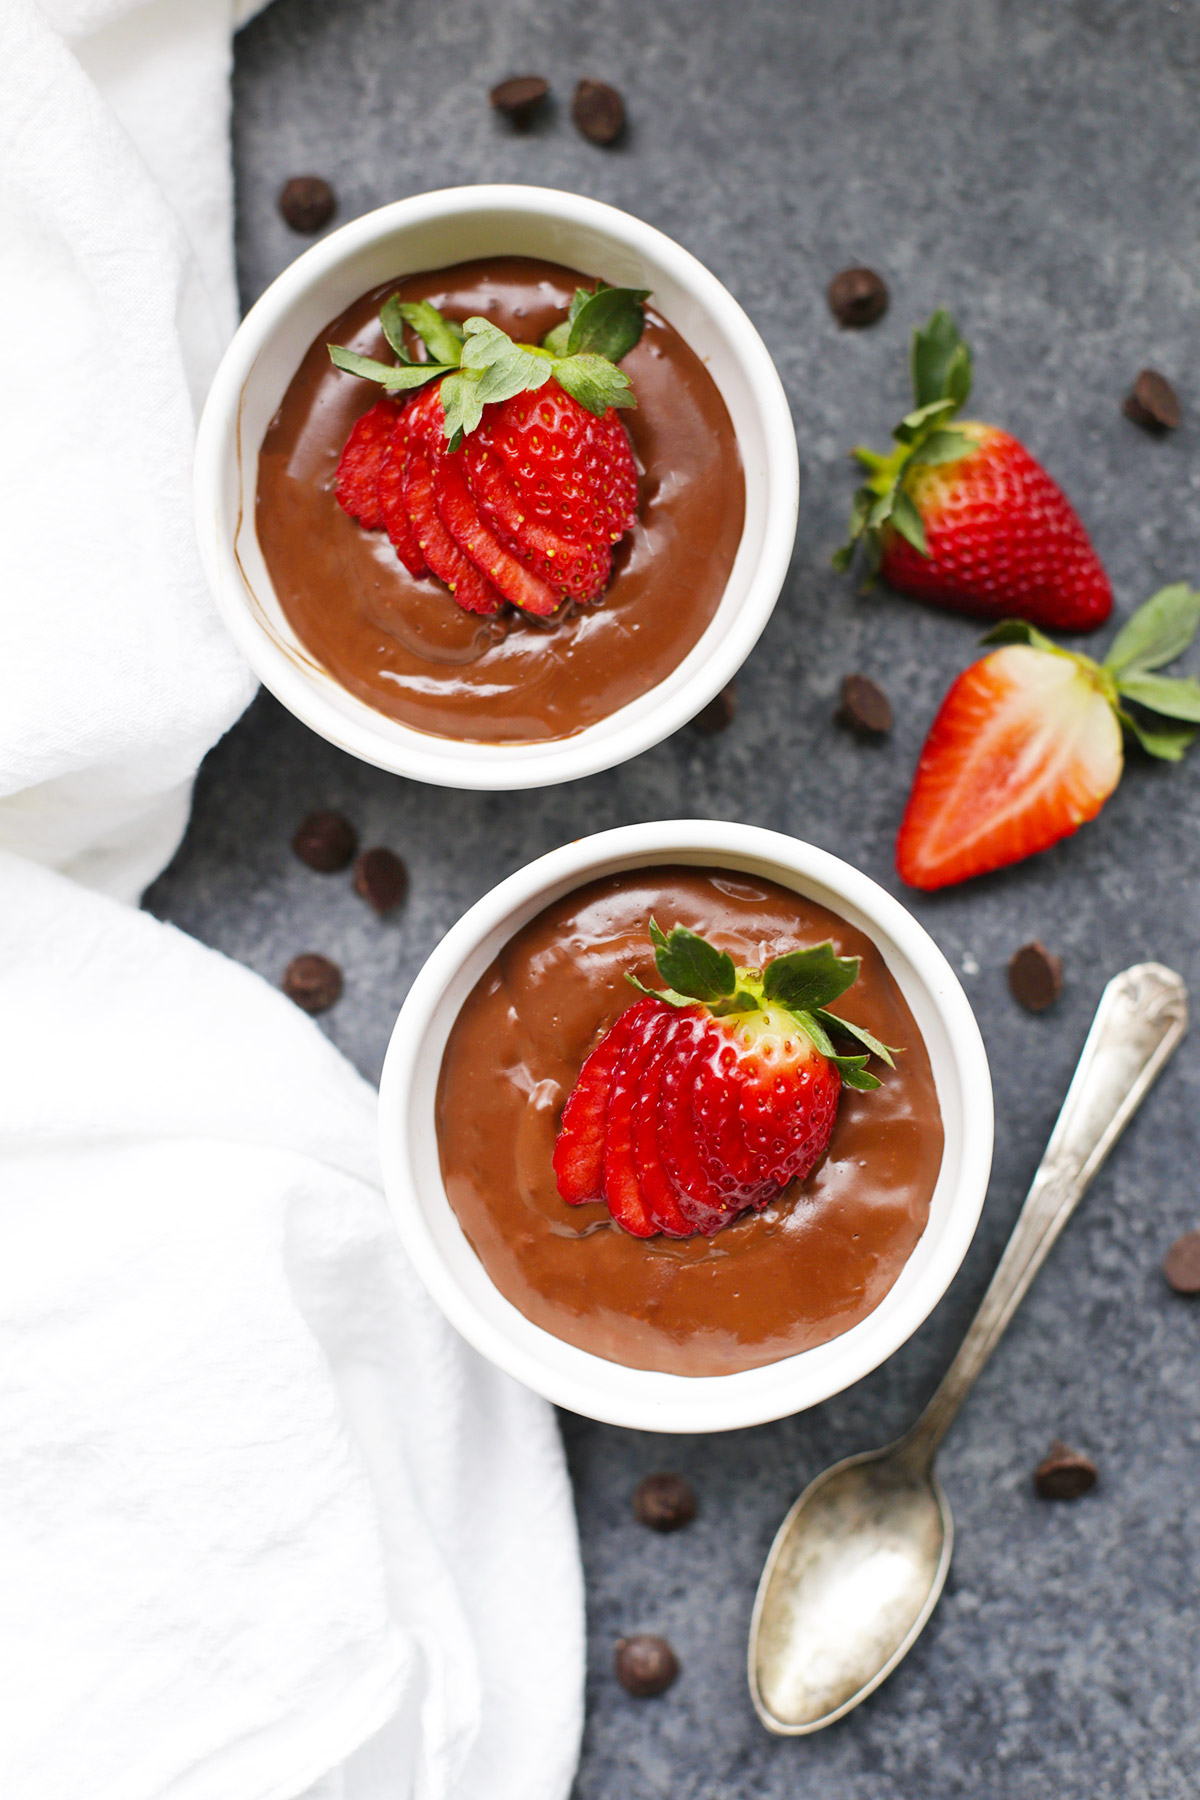 Paleo + Vegan Chocolate Pudding from One Lovely Life